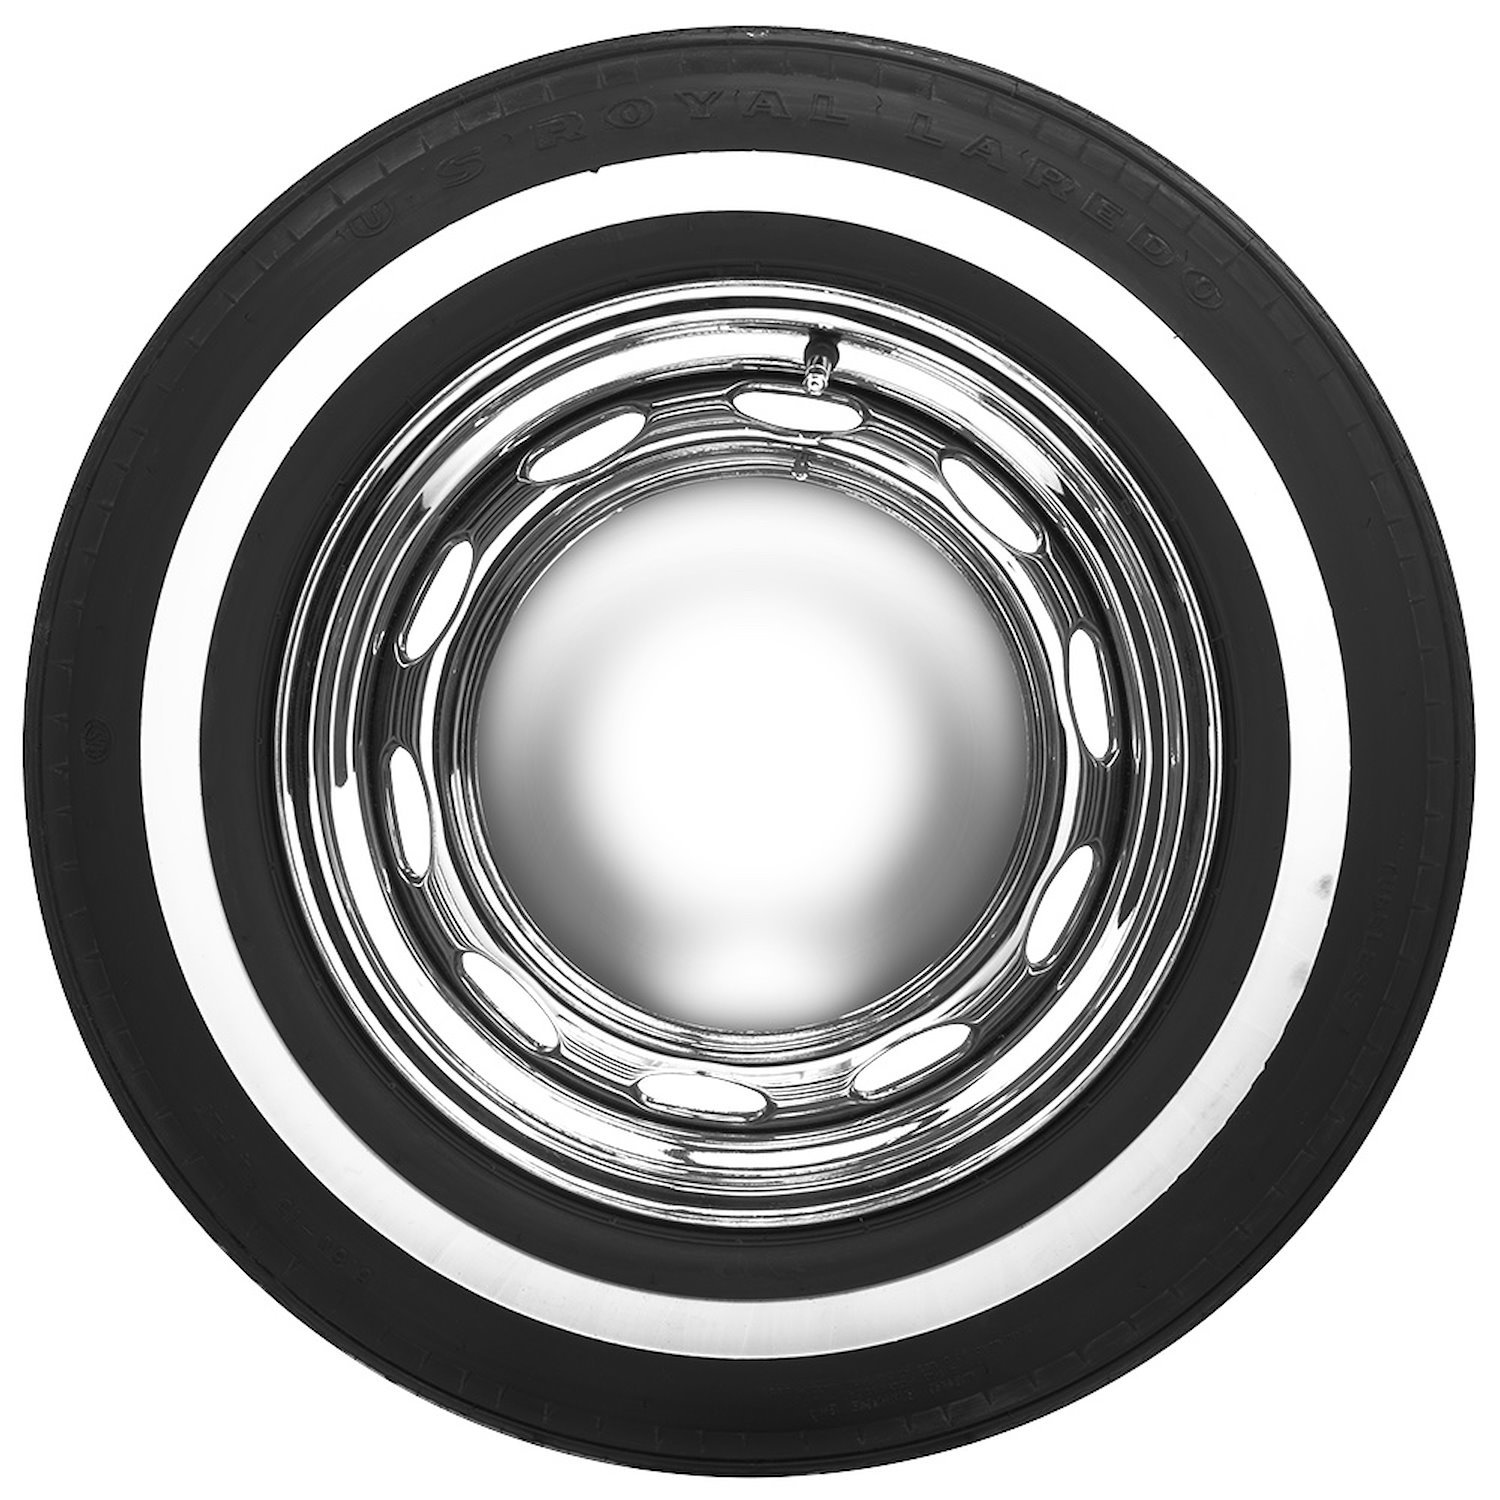 52360 Tire, US Royal 1.00-Inch Whitewall, LTB, 750-14